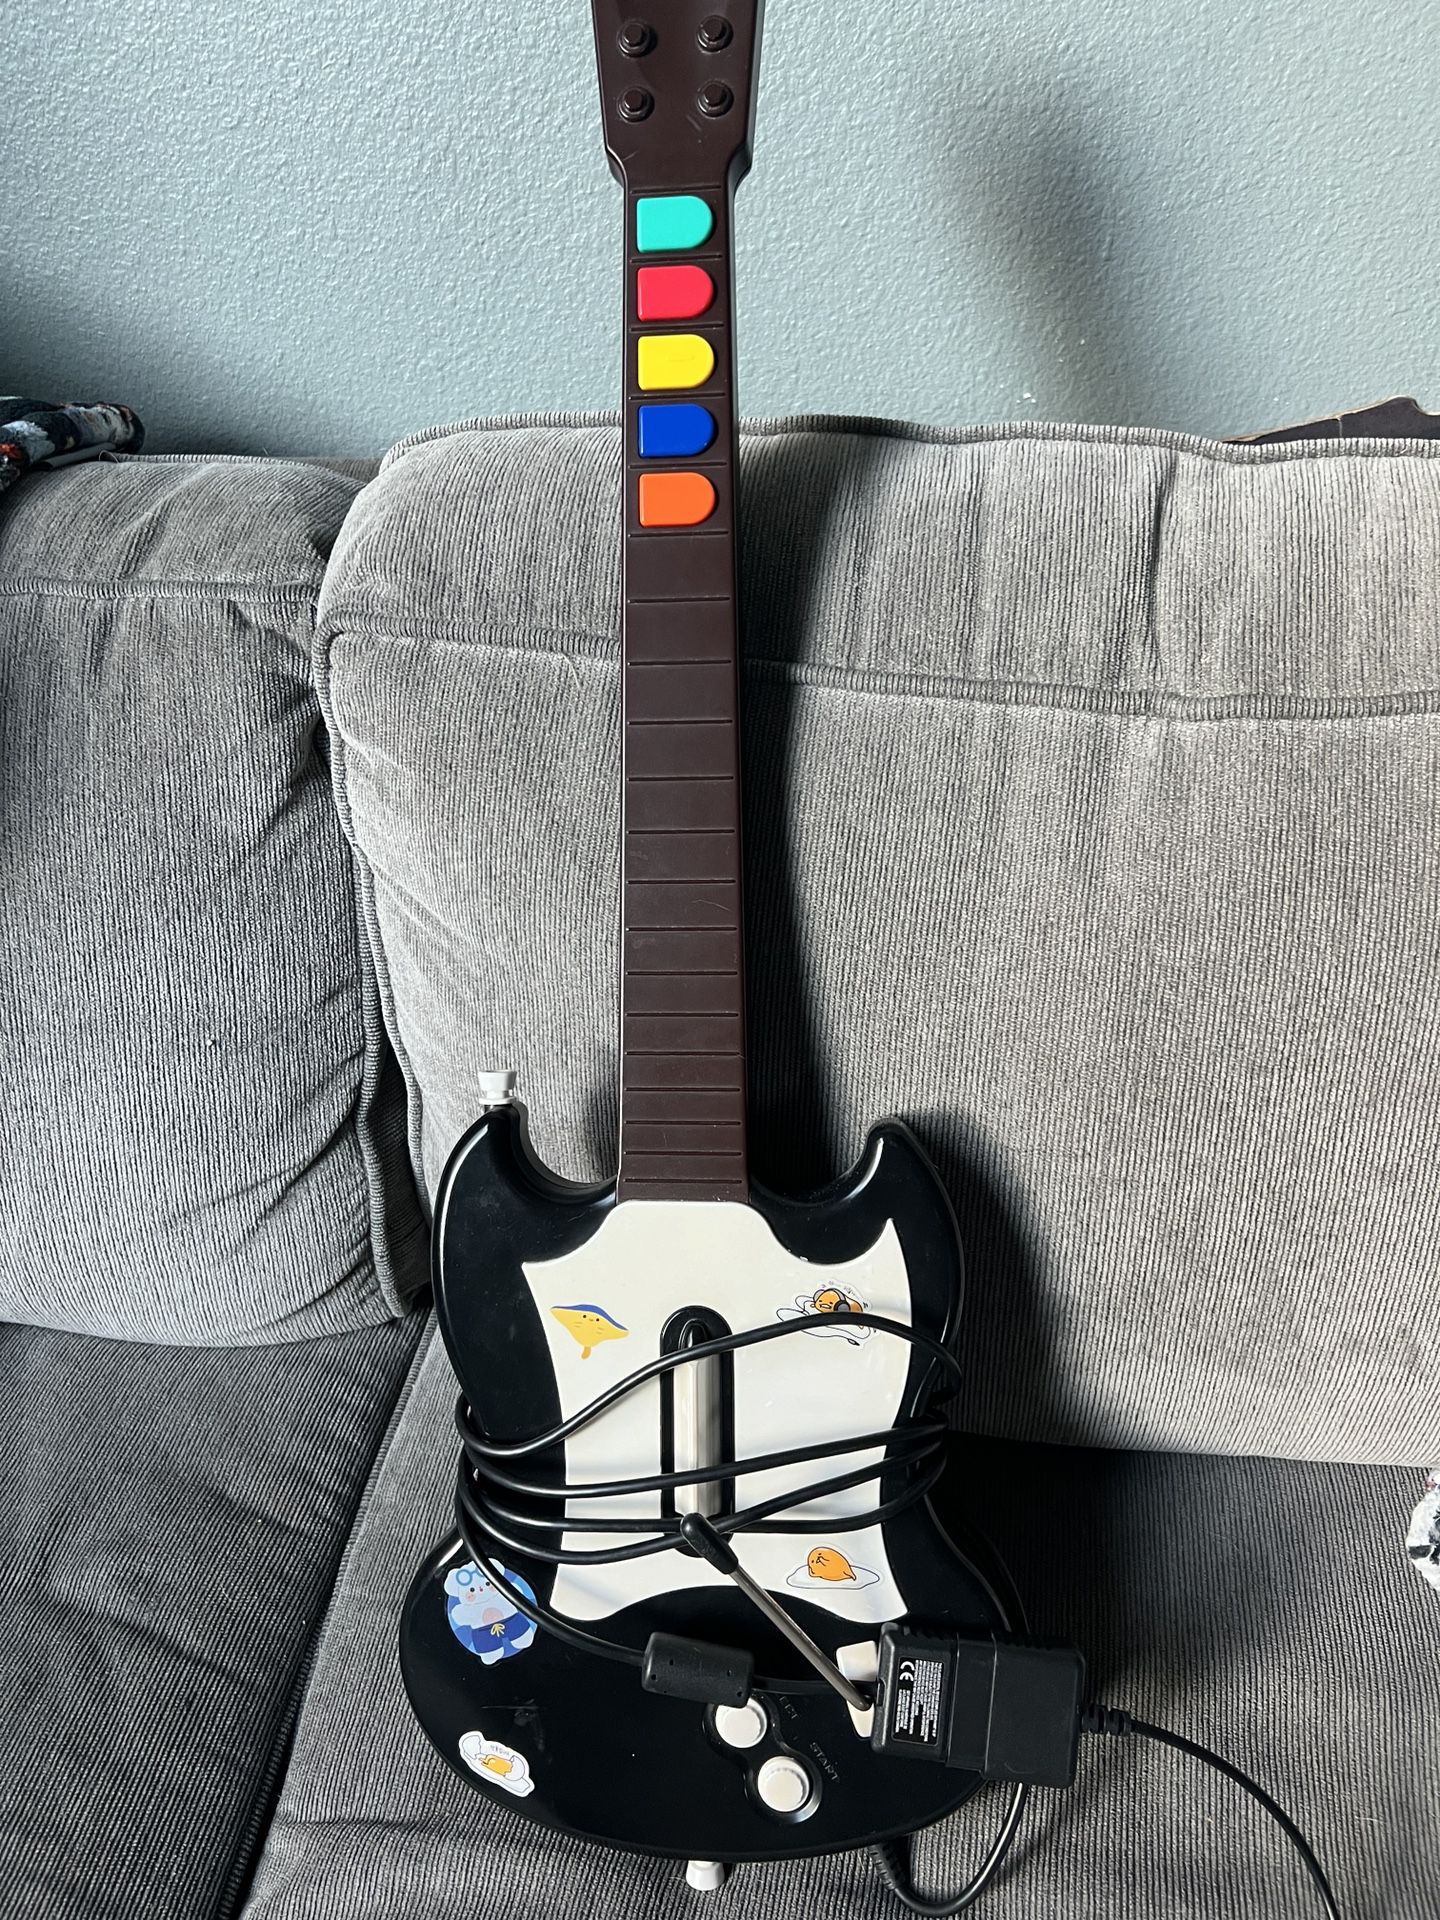 PS2 guitar Hero Controller With USB Dongle 